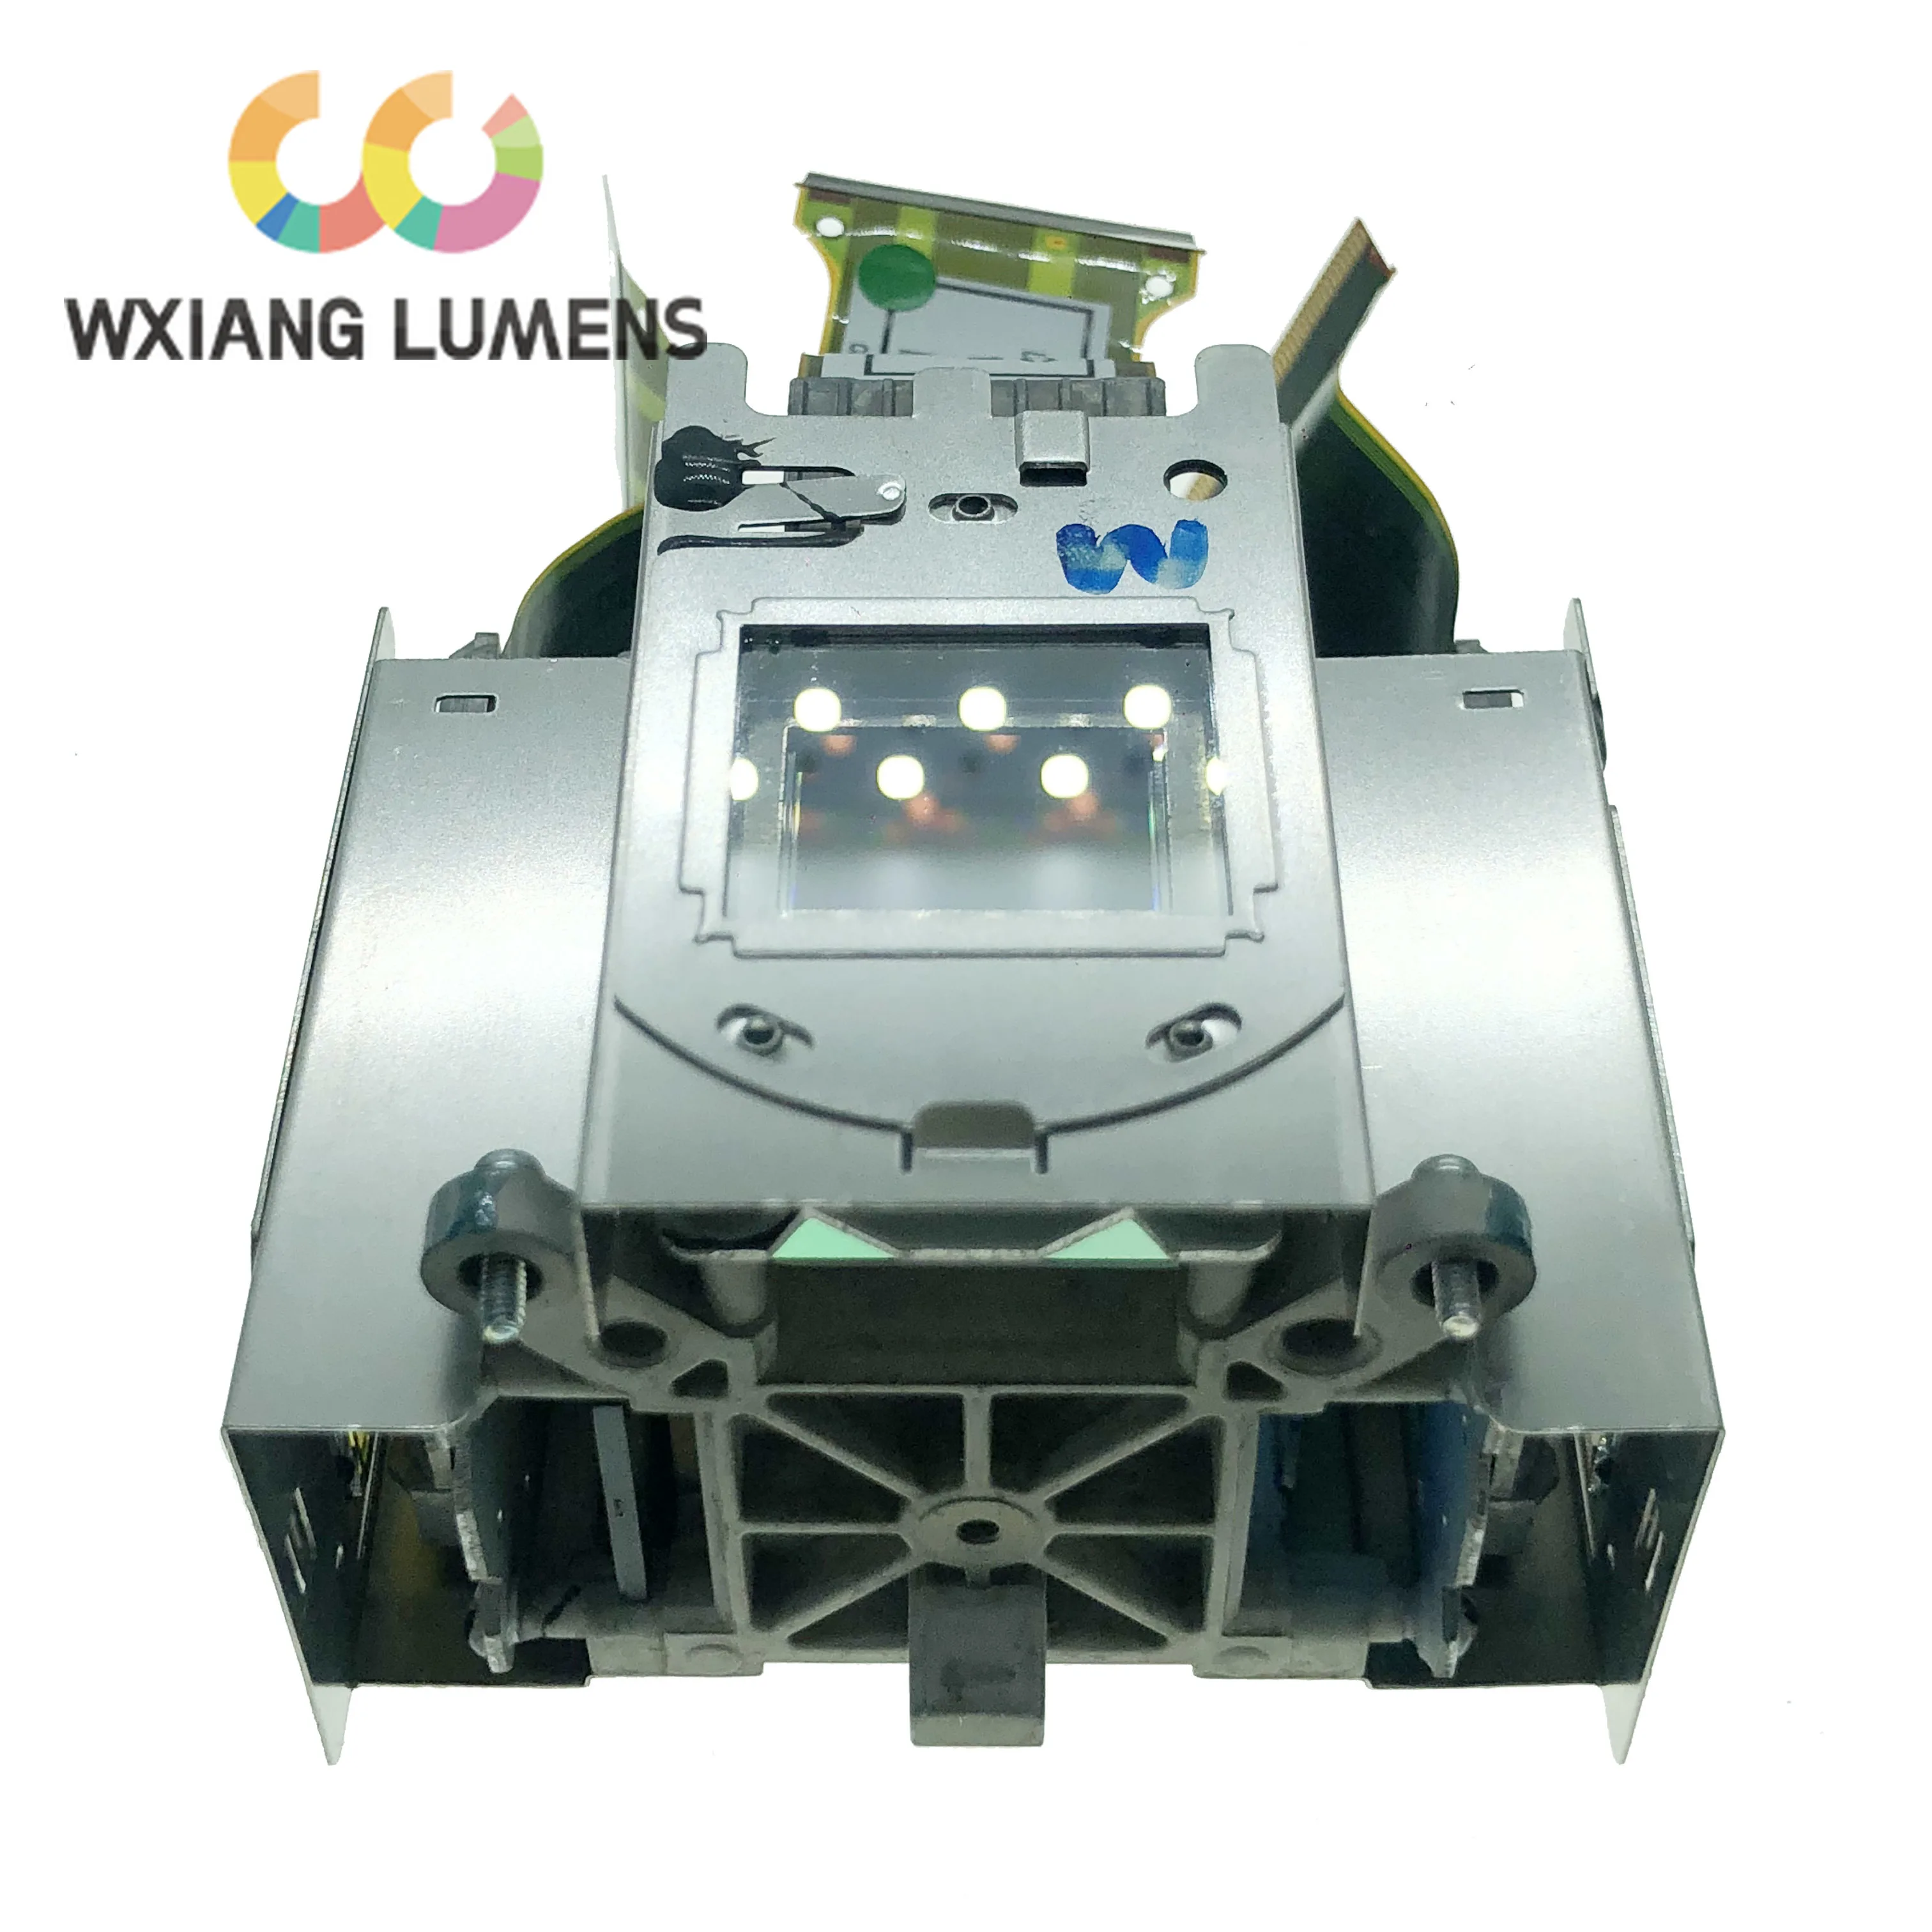 

Projector LCD Prism Assy Wholeset Block Optical Unit L30C7W-96G00 Fit for Hitachi CP-WU8700